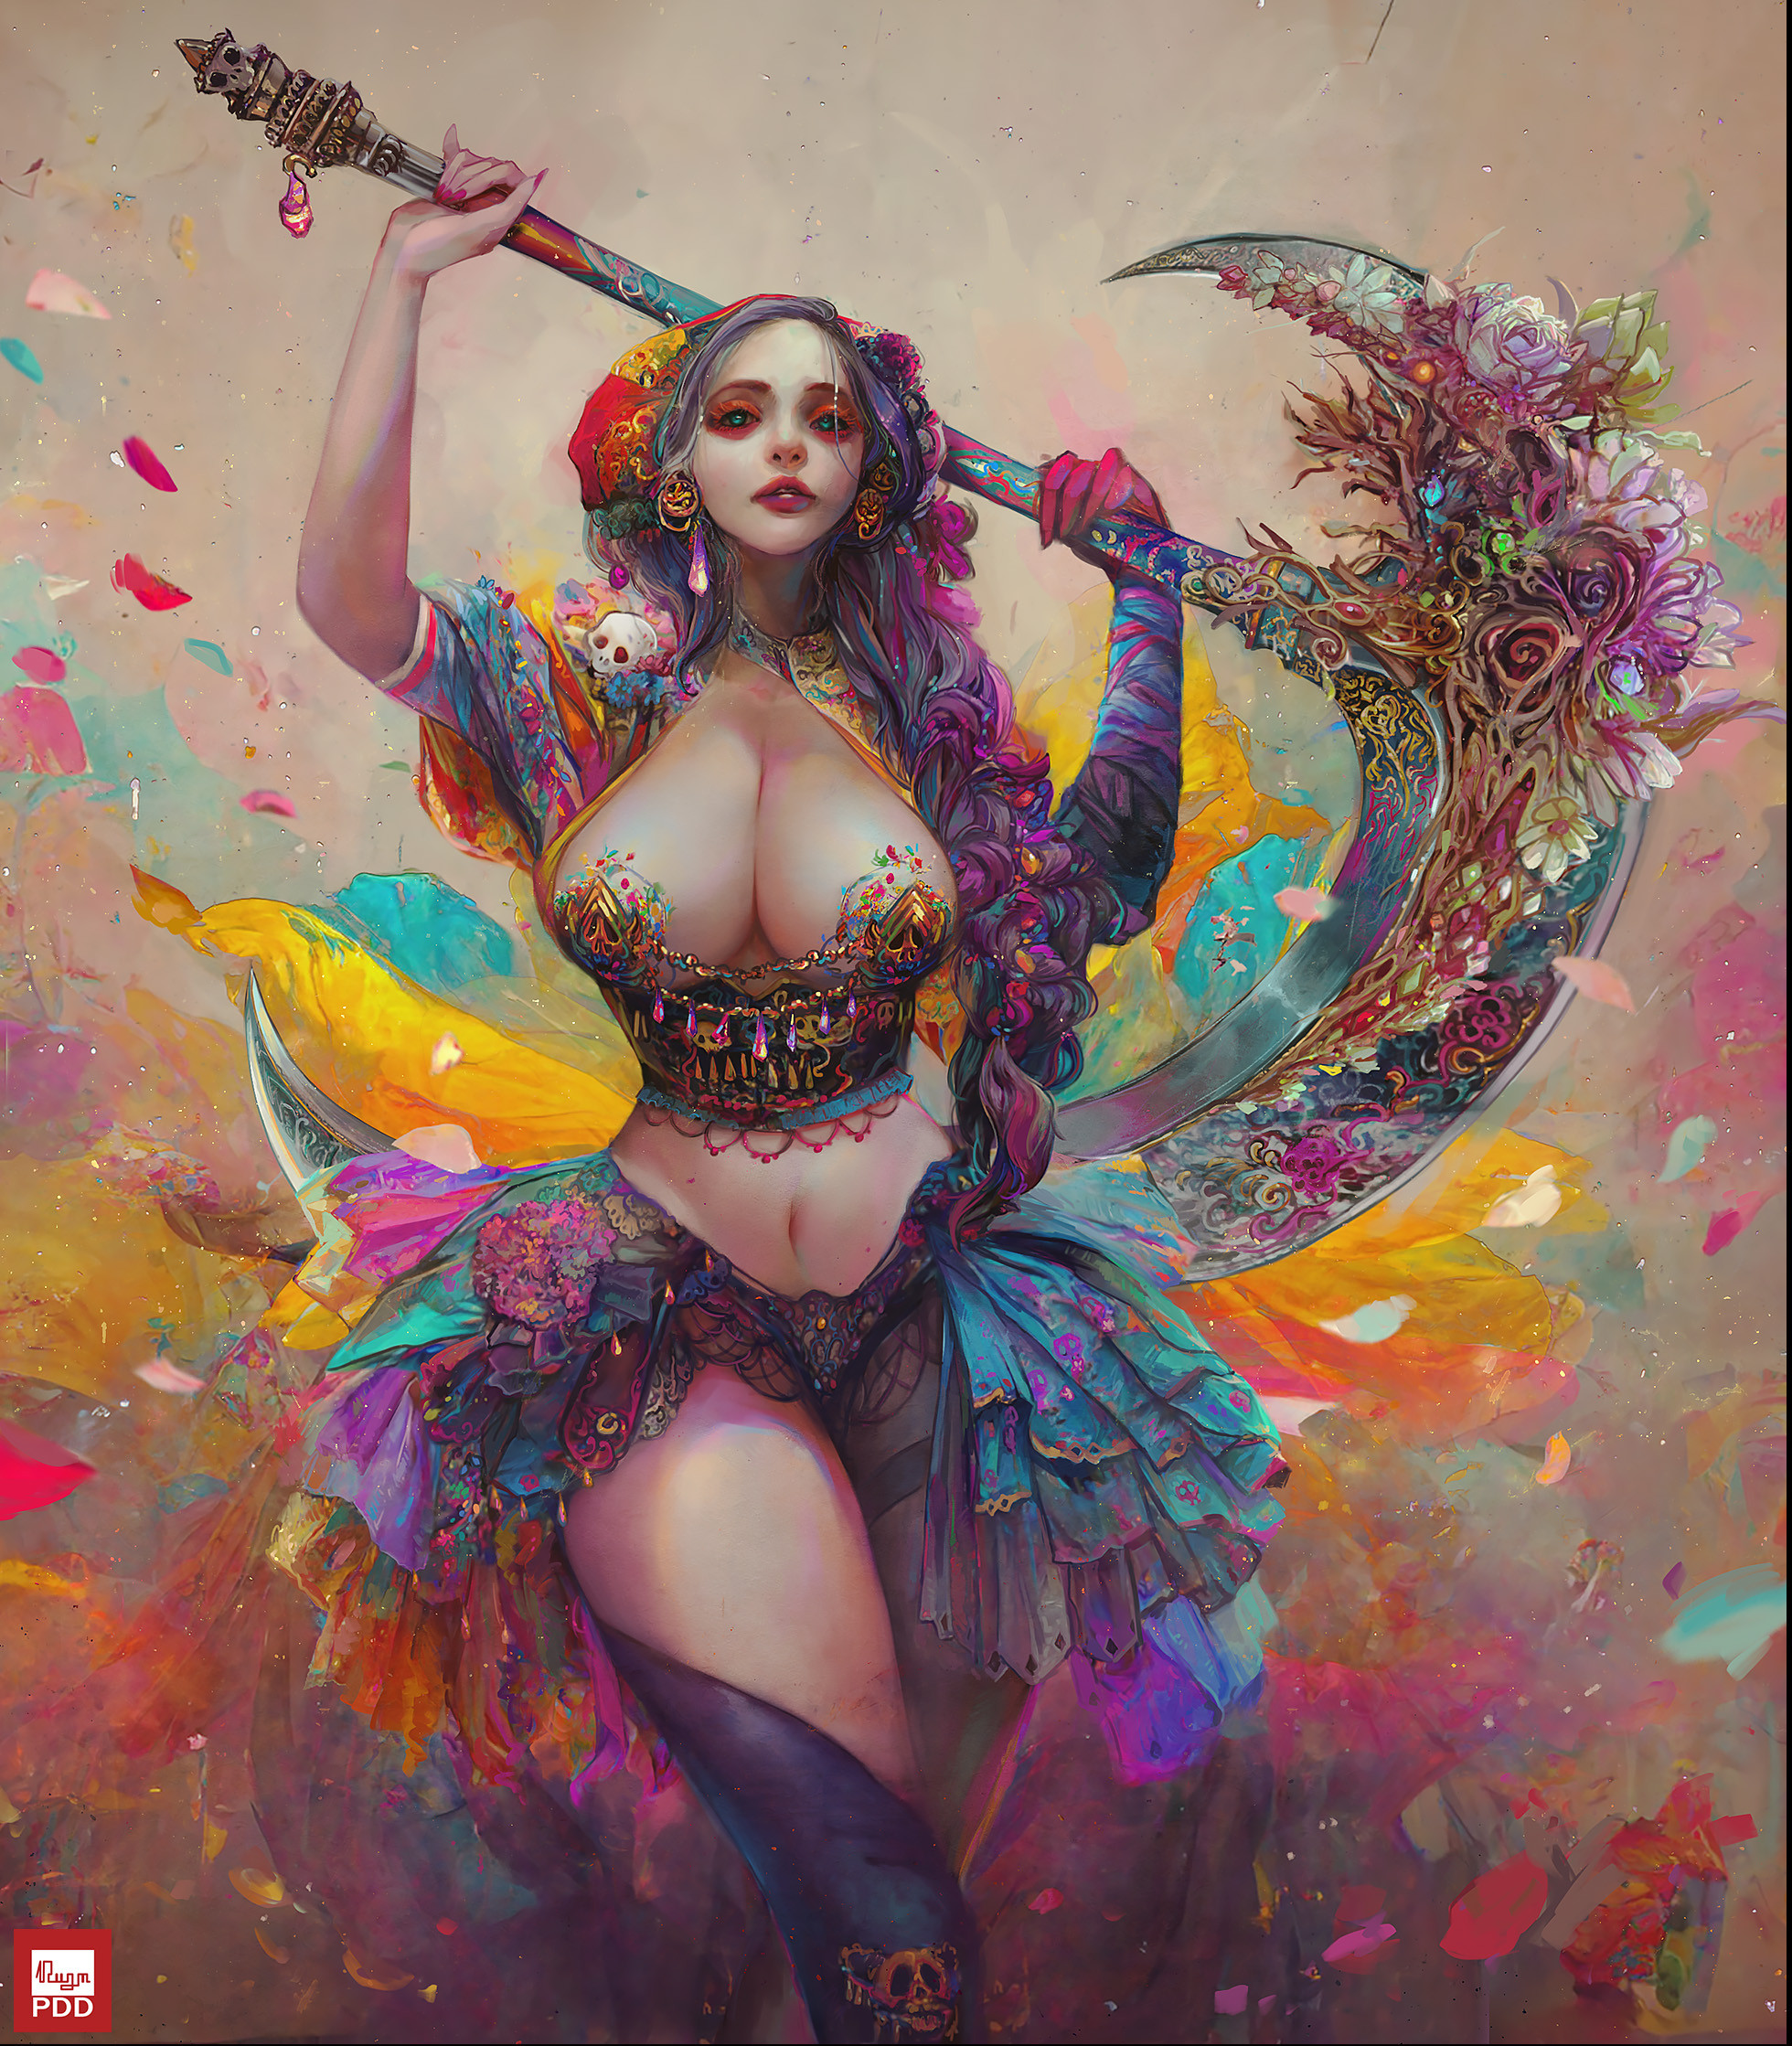 General 1960x2238 artwork women fantasy art fantasy girl girls with guns scythe boobs big boobs huge breasts red lipstick flowers arms up painted nails watermarked Dzung Phung Dinh belly